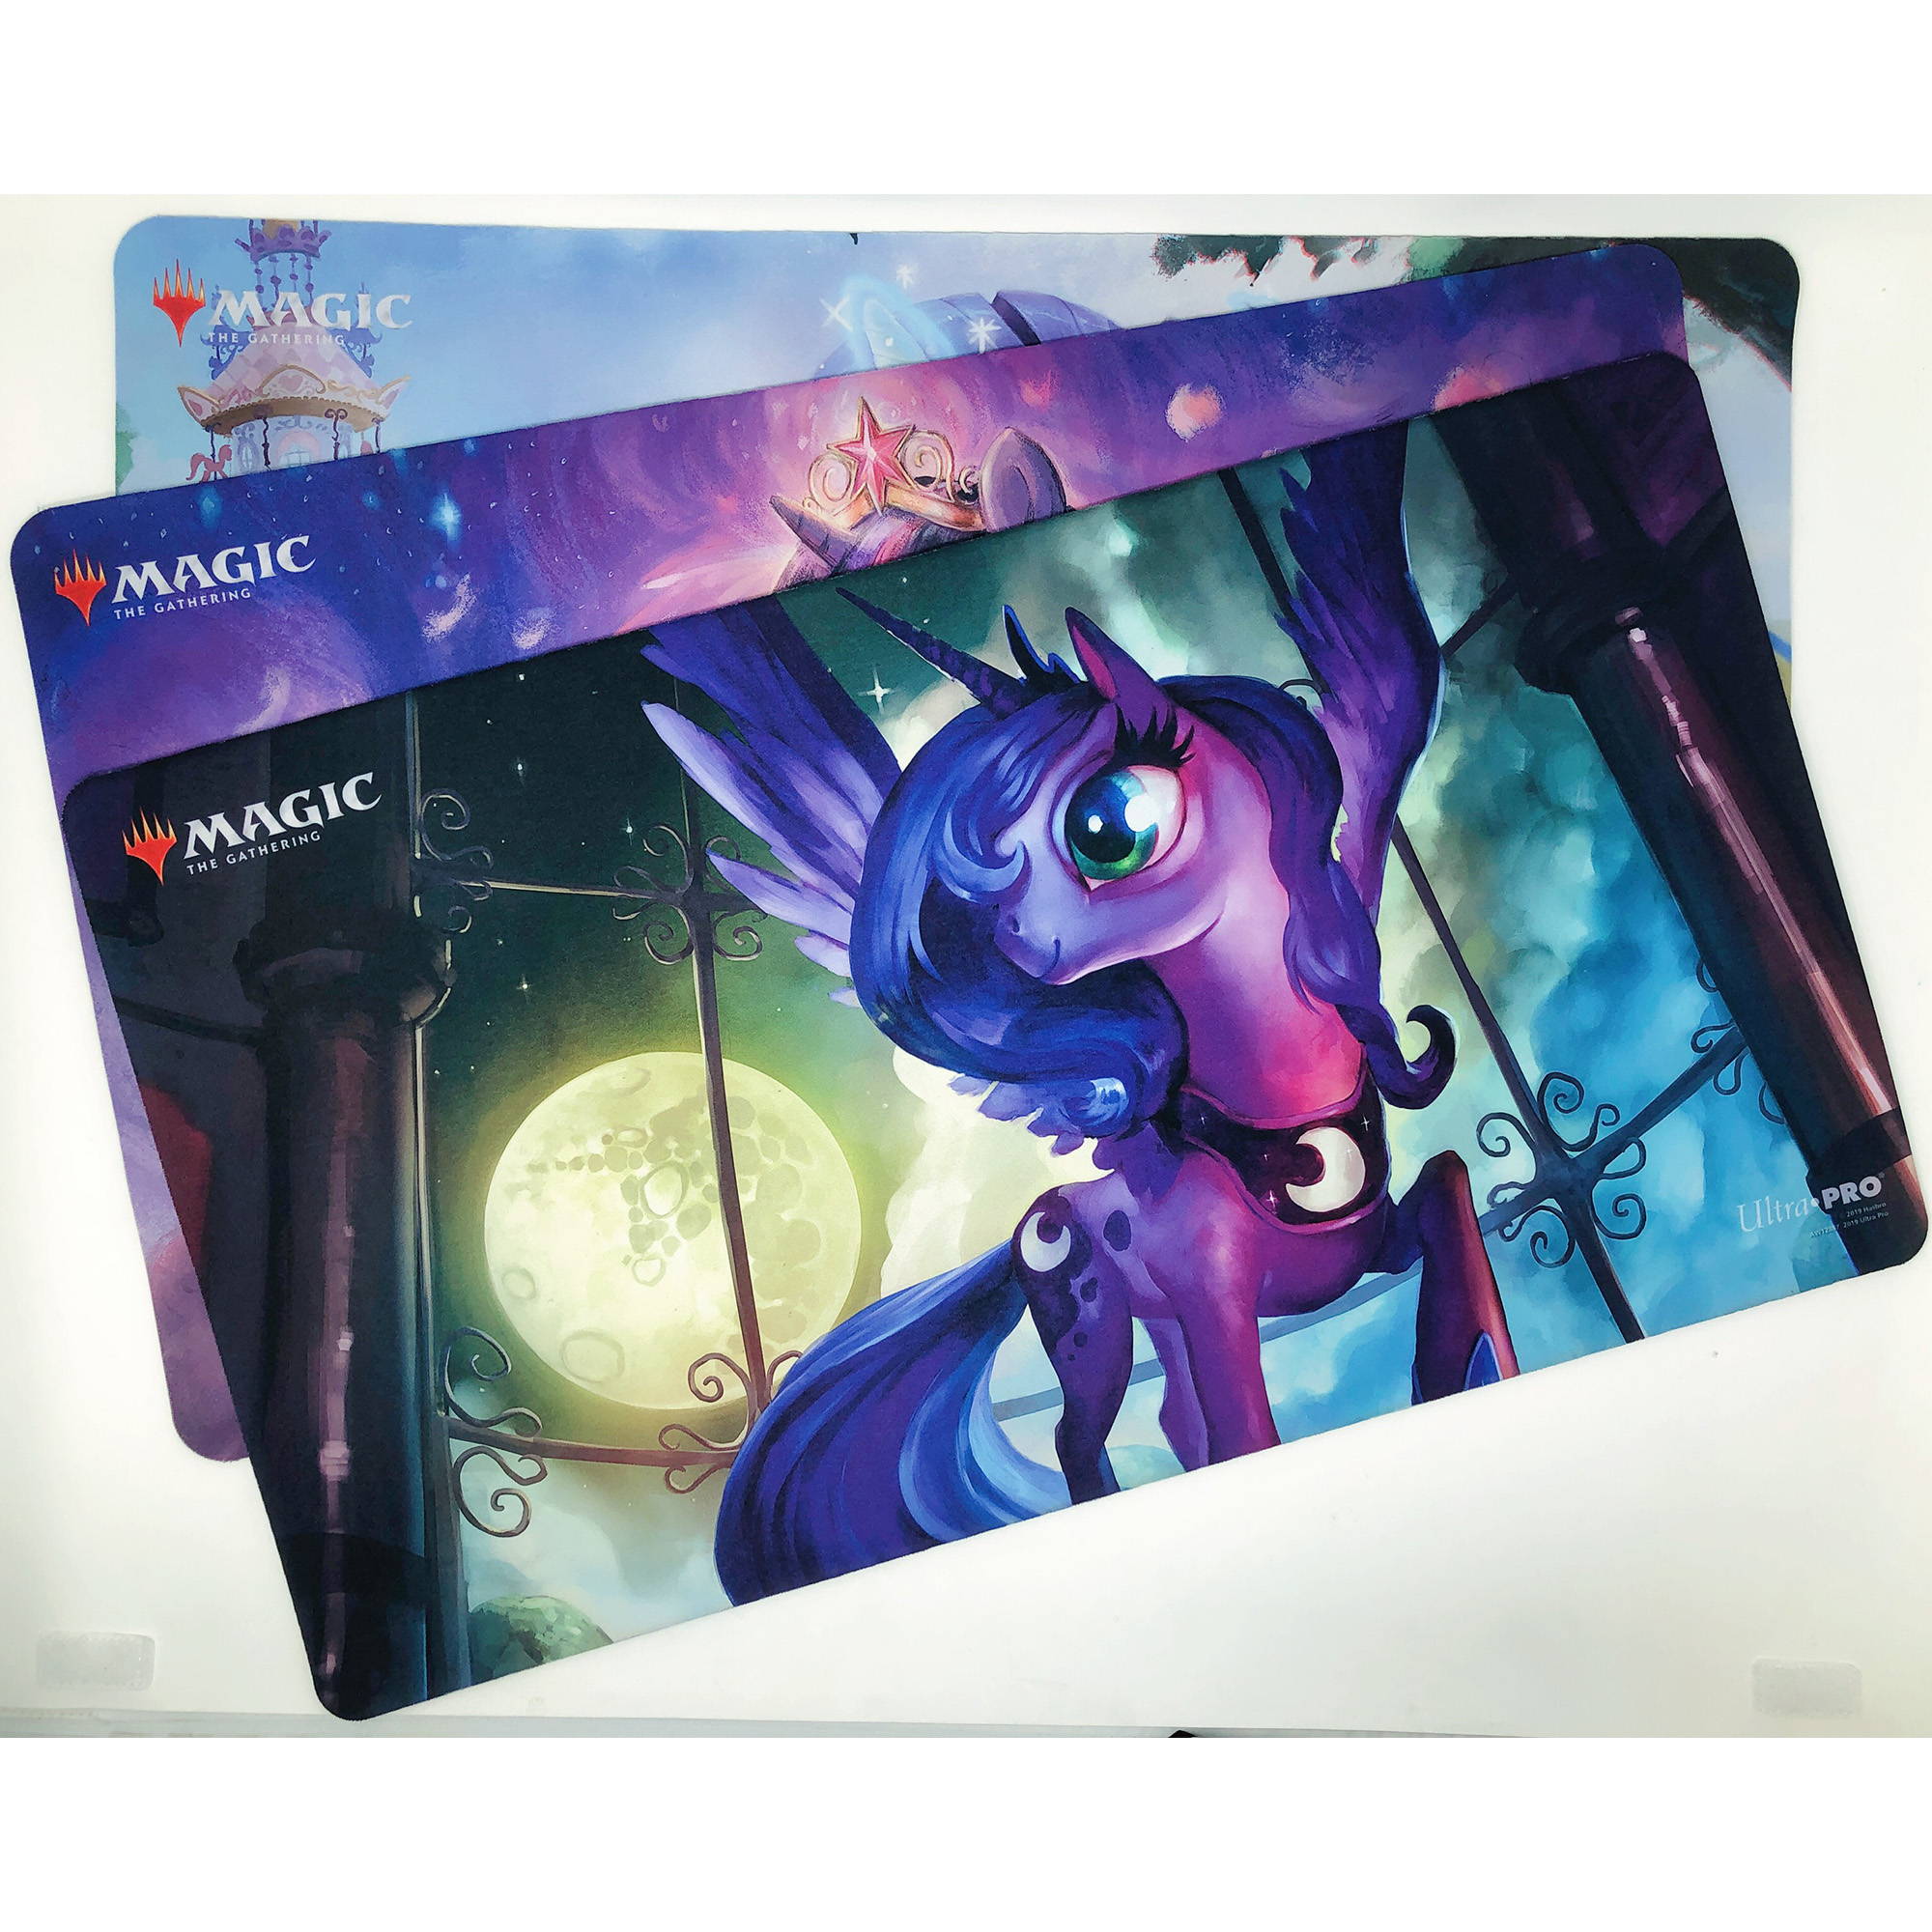 The Gathering My Little Pony Ponies The Galloping Mtg Hasbro Sealed Magic